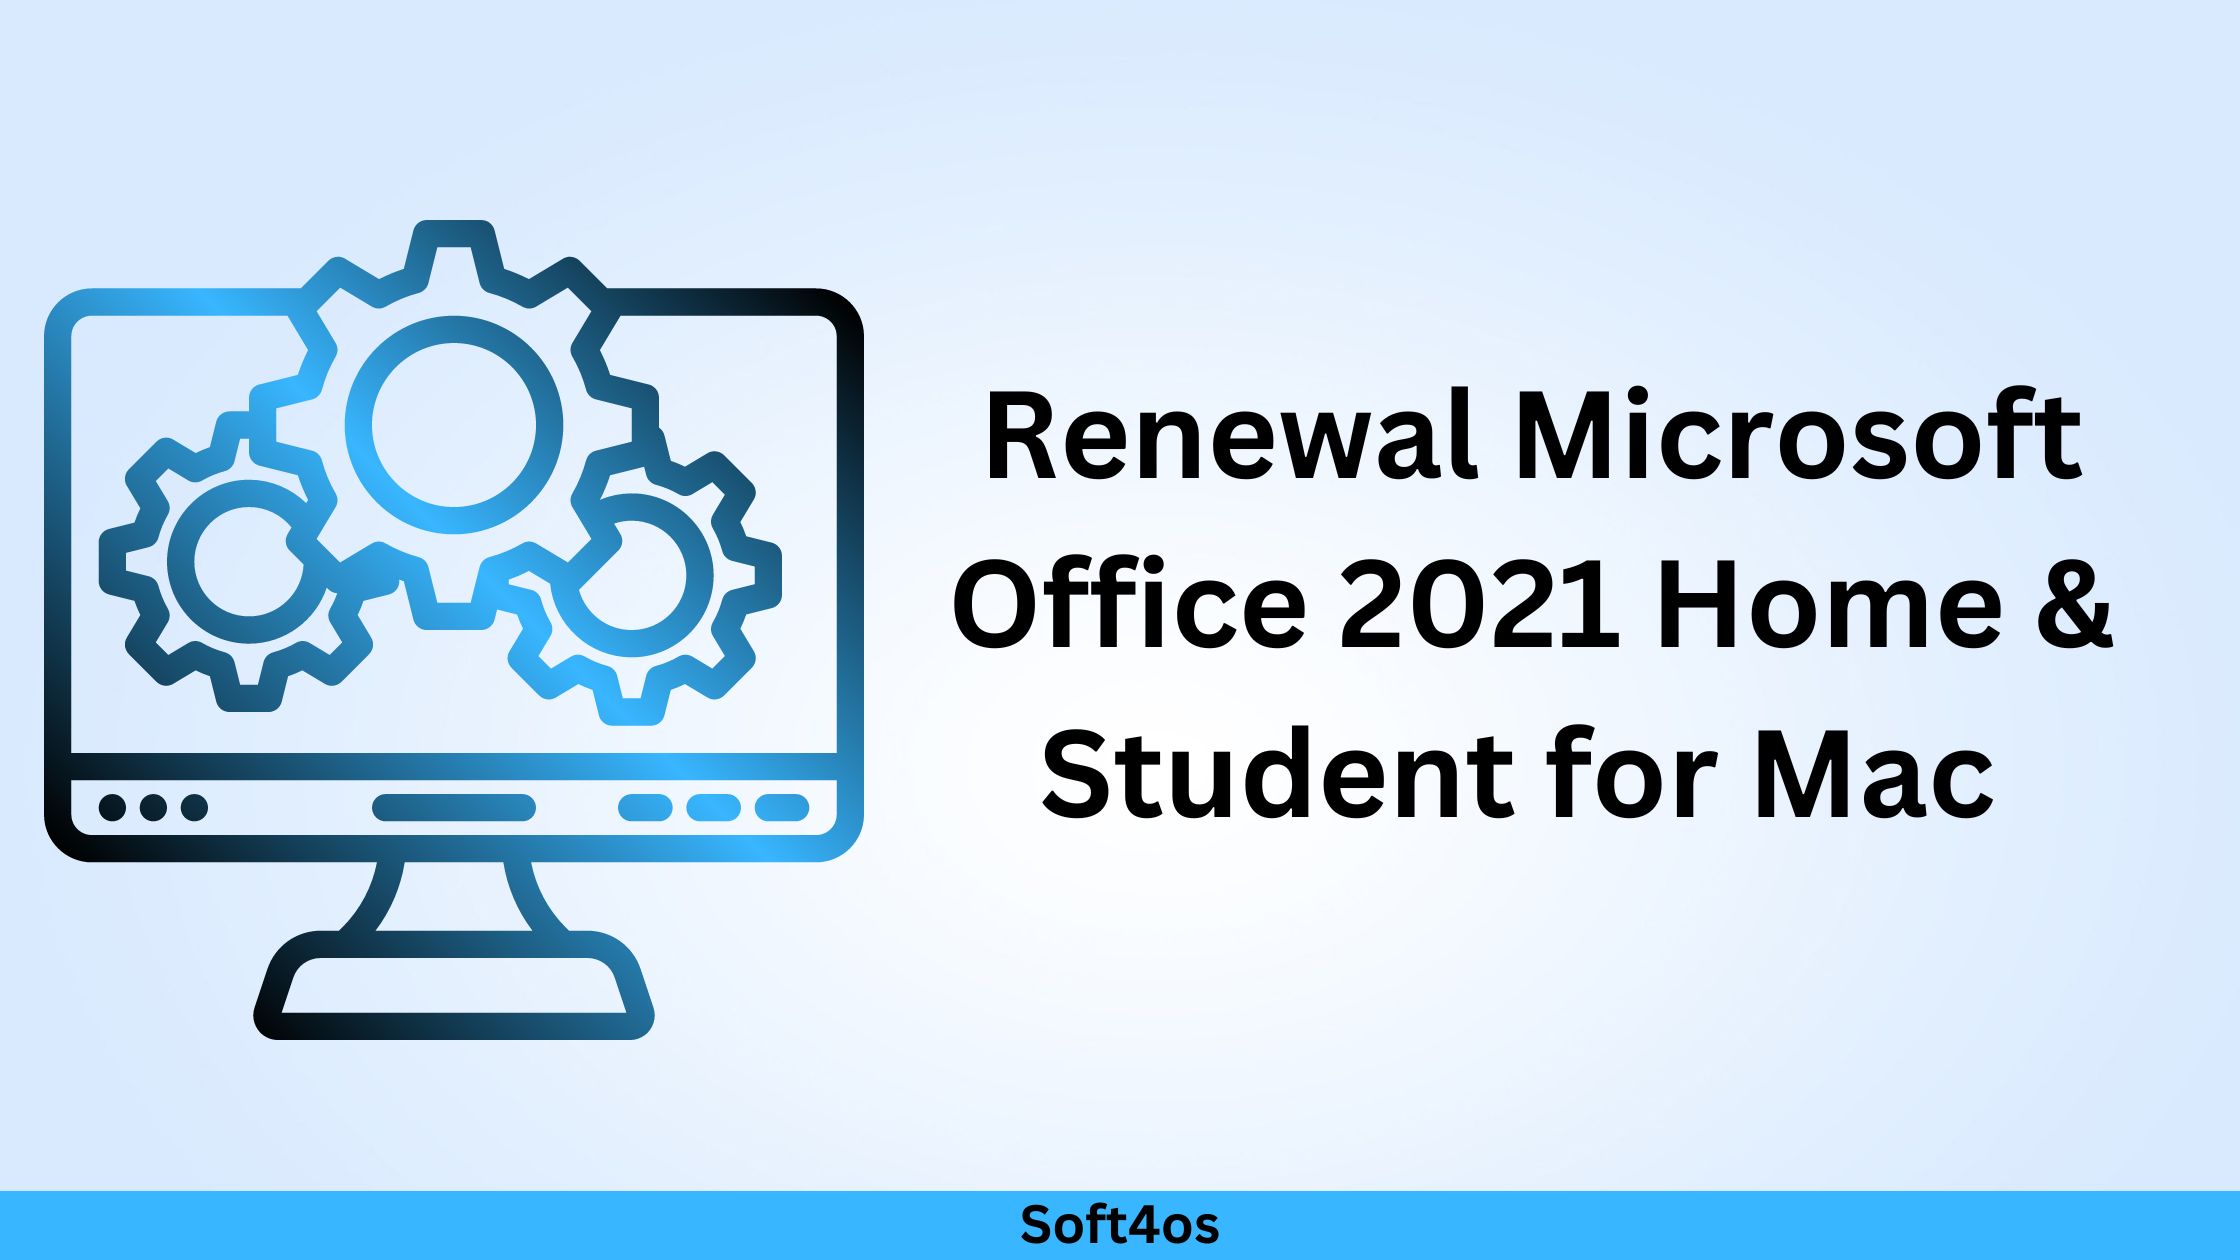 You are currently viewing Renewal Microsoft Office 2021 Home & Student for Mac